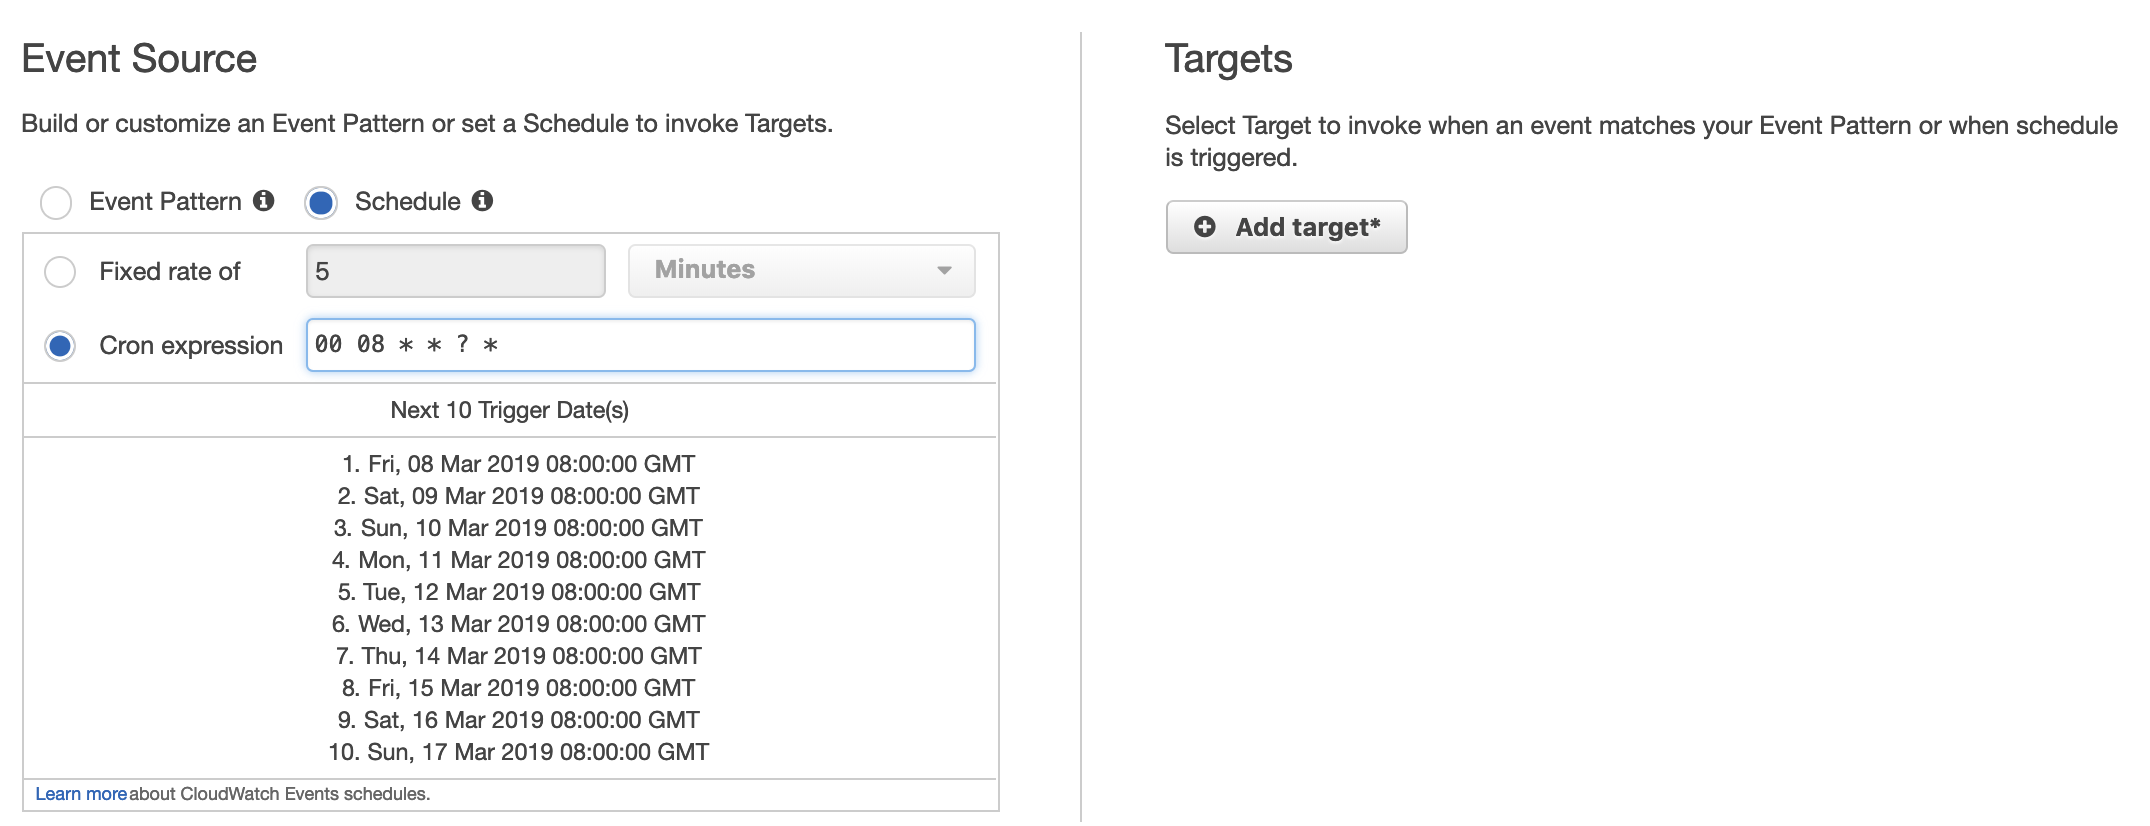 Event Source Targets

Build or customize an Event Pattern or set a Schedule to invoke Targets. Select Target to invoke when an event matches your Event Pattern or when schedule
is triggered.

Event Pattern @ @) Schedule @
© Add target*

Fixed rate of 5 Minutes v

@ Cronexpression 00 08 * * ? *

Next 10 Trigger Date(s)

1. Fri, 08 Mar 2019 08:00:00 GMT
2. Sat, 09 Mar 2019 08:00:00 GMT
3. Sun, 10 Mar 2019 08:00:00 GMT
4. Mon, 11 Mar 2019 08:00:00 GMT
5. Tue, 12 Mar 2019 08:00:00 GMT
6. Wed, 13 Mar 2019 08:00:00 GMT
7. Thu, 14 Mar 2019 08:00:00 GMT
8. Fri, 15 Mar 2019 08:00:00 GMT
9. Sat, 16 Mar 2019 08:00:00 GMT

10. Sun, 17 Mar 2019 08:00:00 GMT

Learn more about CloudWatch Events schedules.